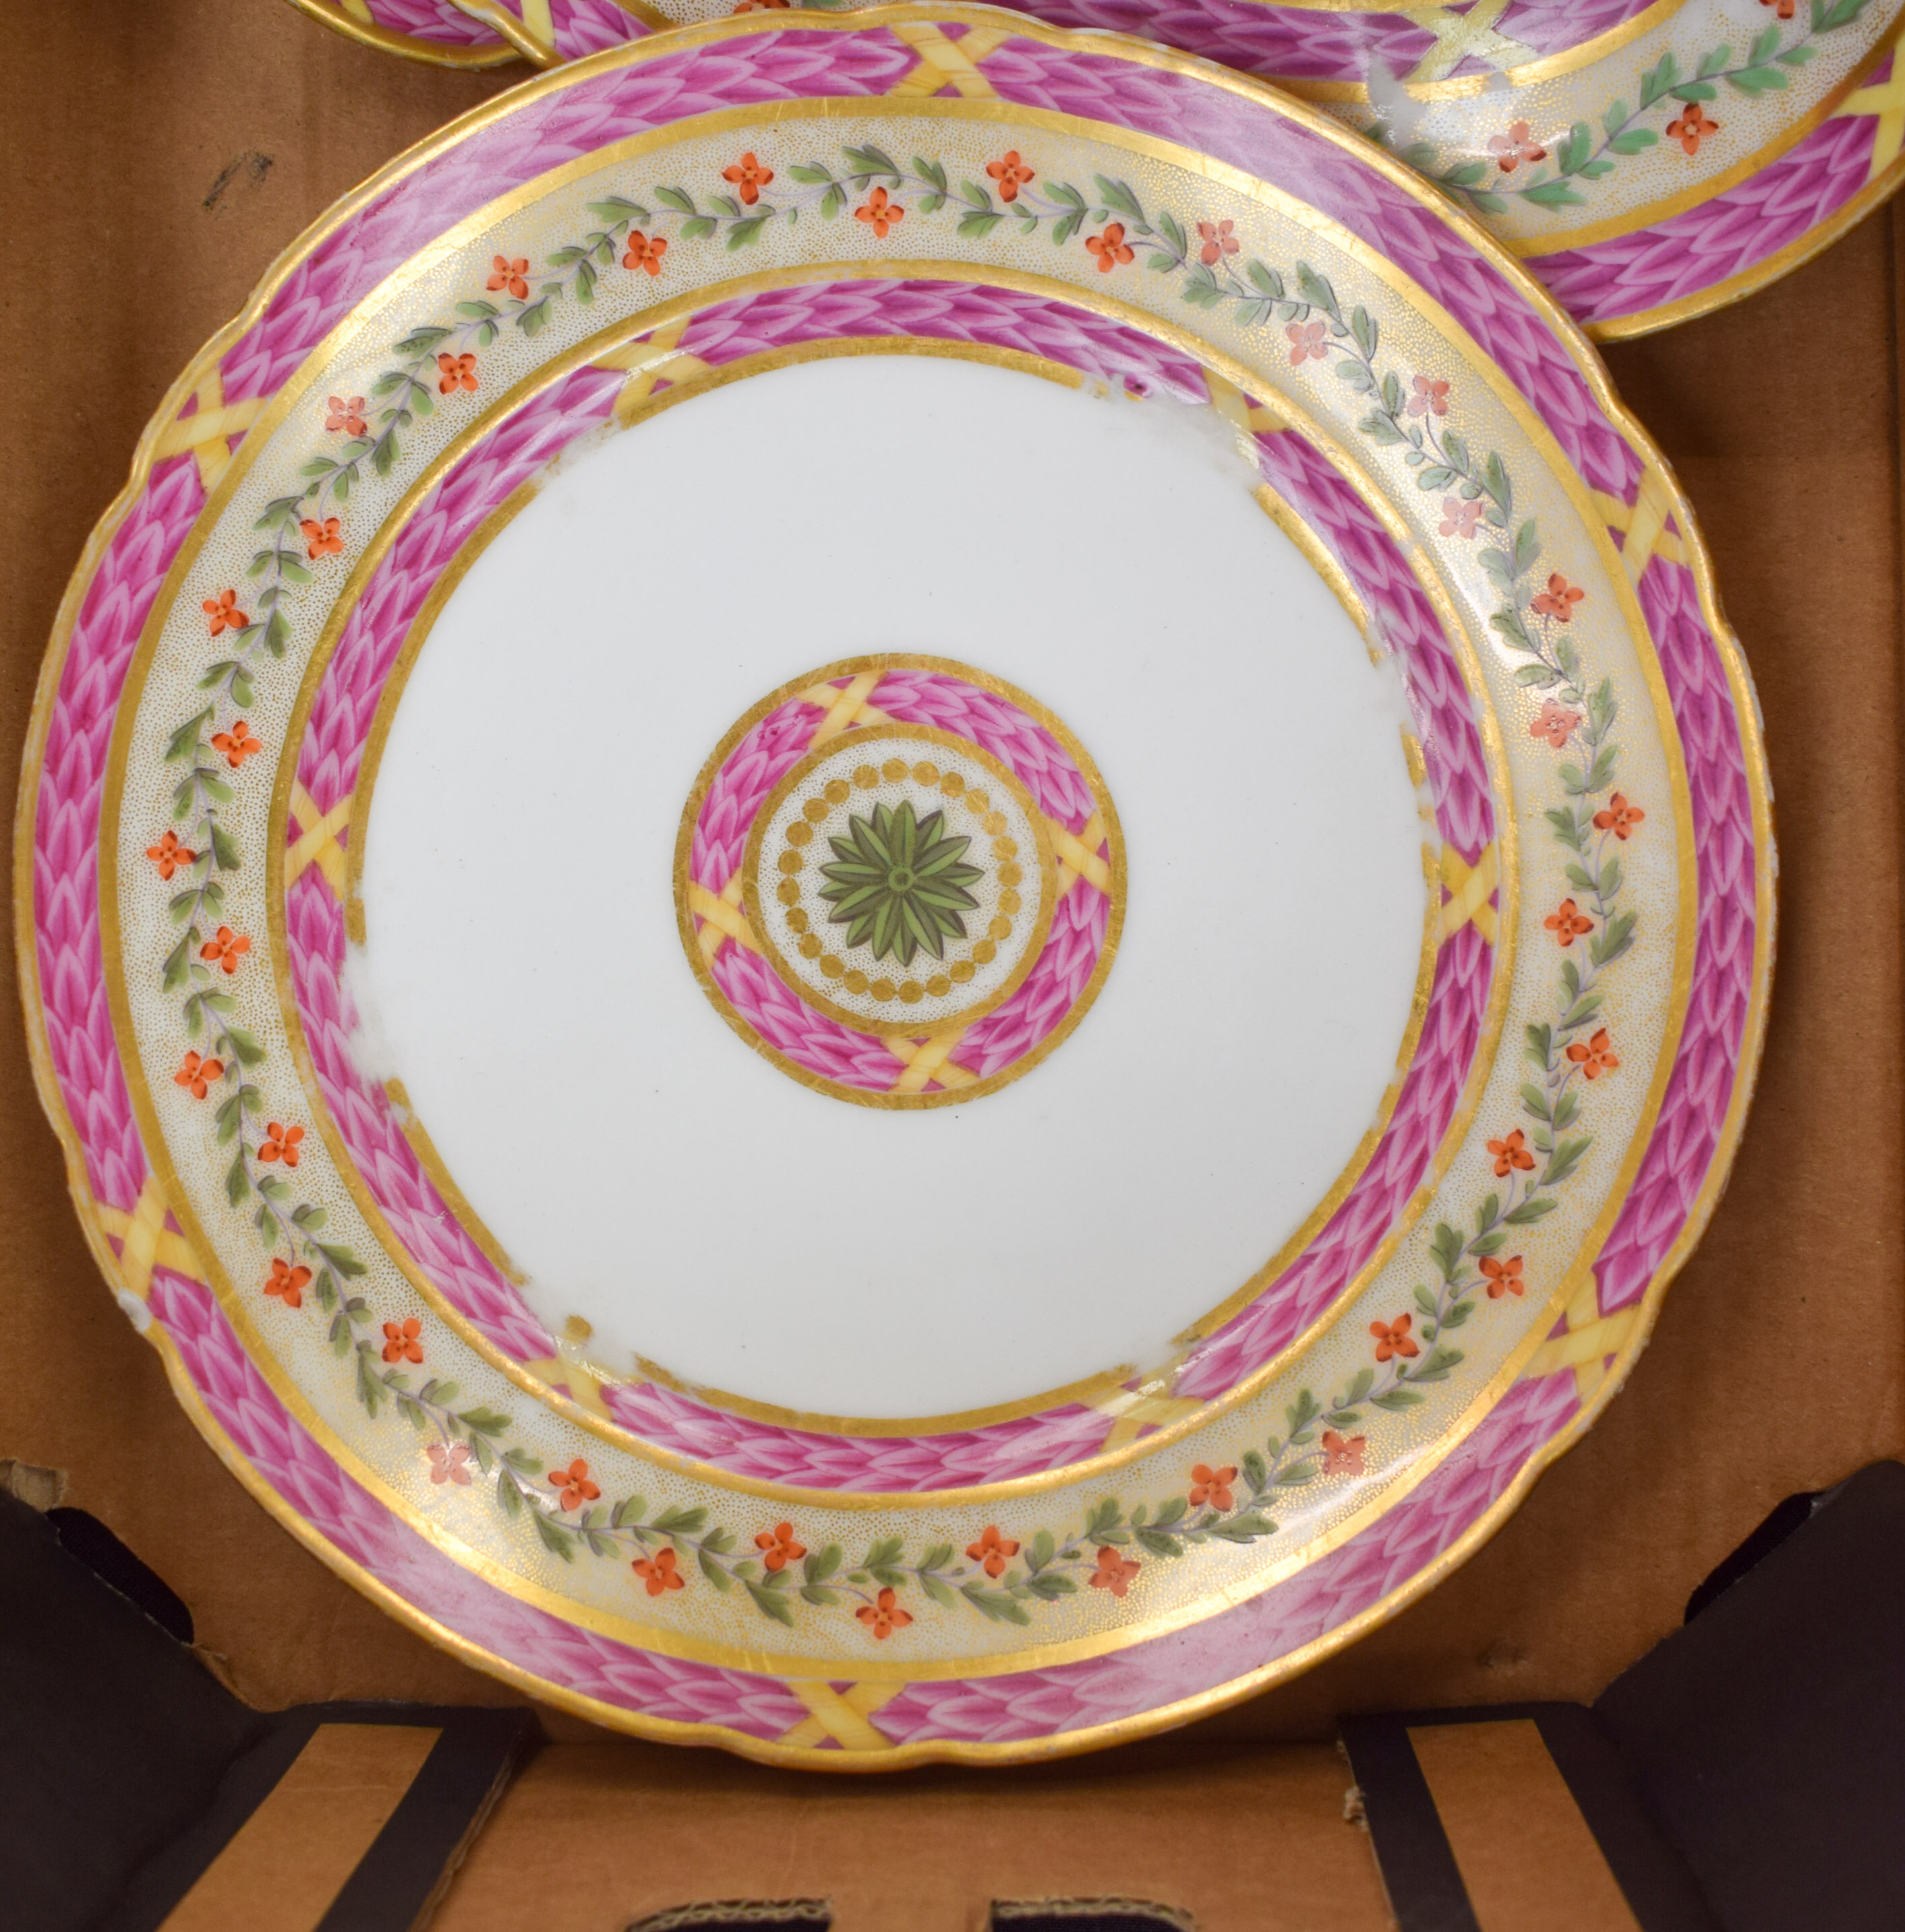 AN EARLY 19TH CENTURY FRENCH RUE THIROUX PARIS PART DESSERT SERVICE painted with flowers. Largest 21 - Image 5 of 13